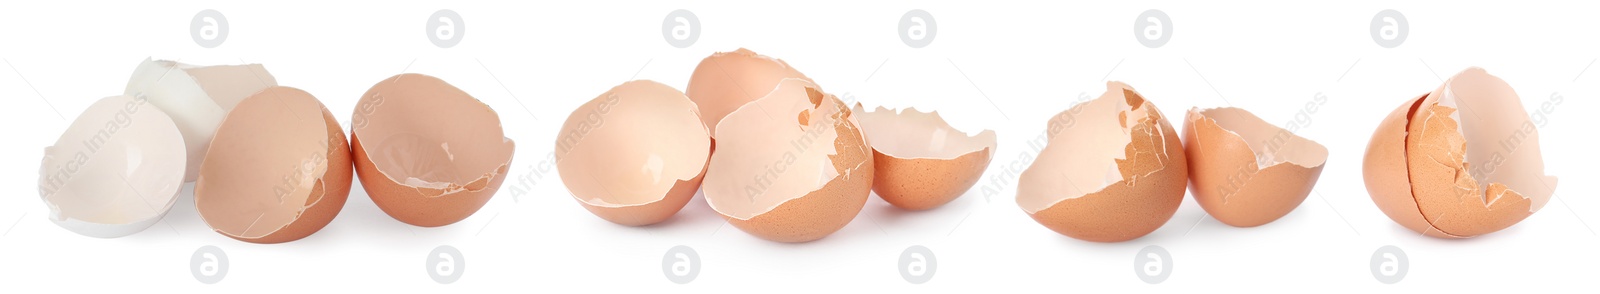 Image of Egg shells on white background., collage. Composting of organic waste